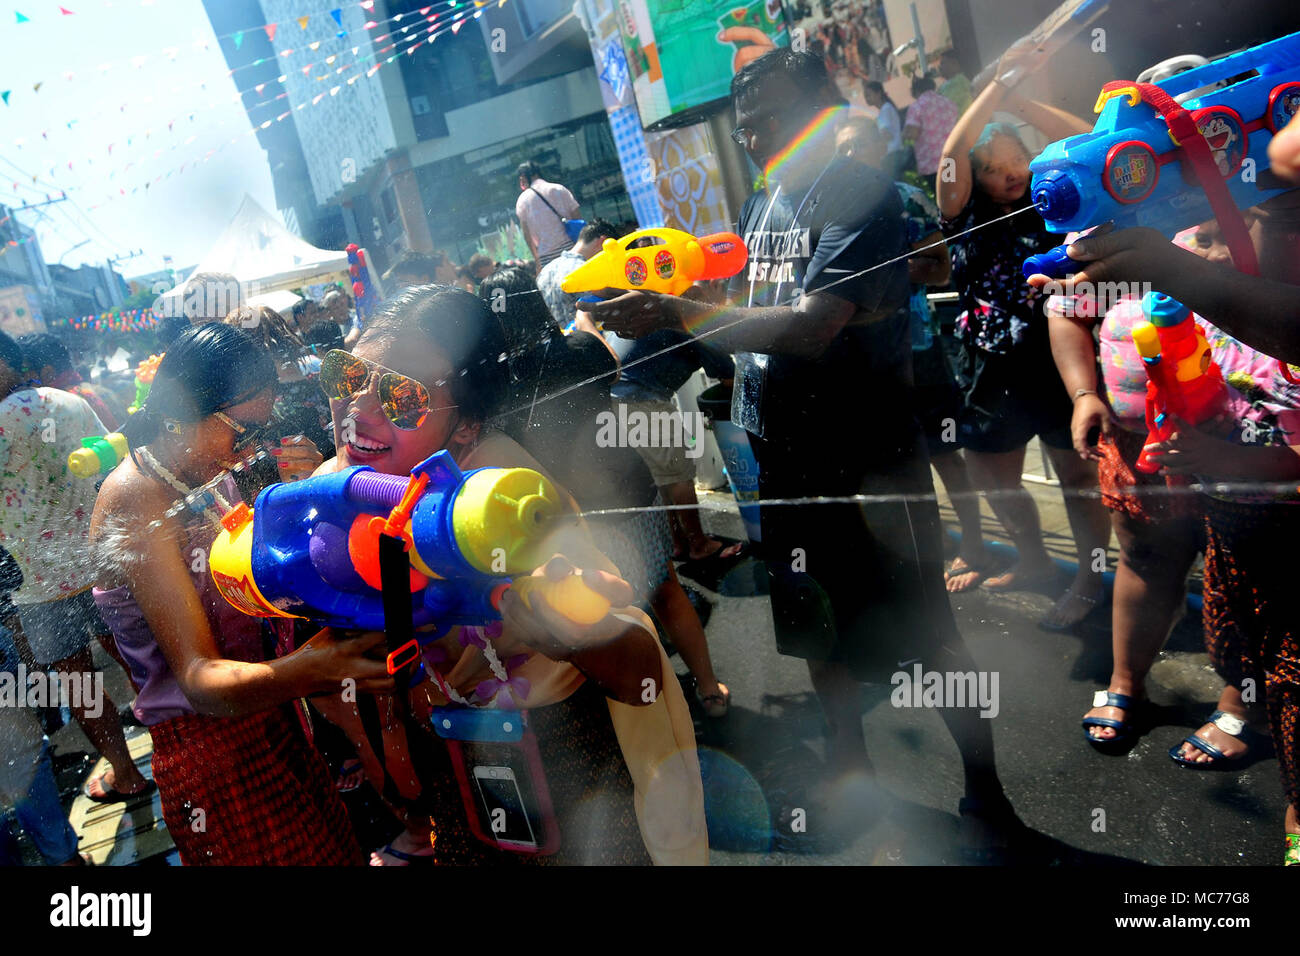 Bangkok, Thailand. 13th Apr, 2018. People take part in water gun battles during celebrations for Songkran Festival, Thailand's traditional New Year Festival, in Siam shopping district of Bangkok, Thailand, April 13, 2018. Credit: Rachen Sageamsak/Xinhua/Alamy Live News Stock Photo